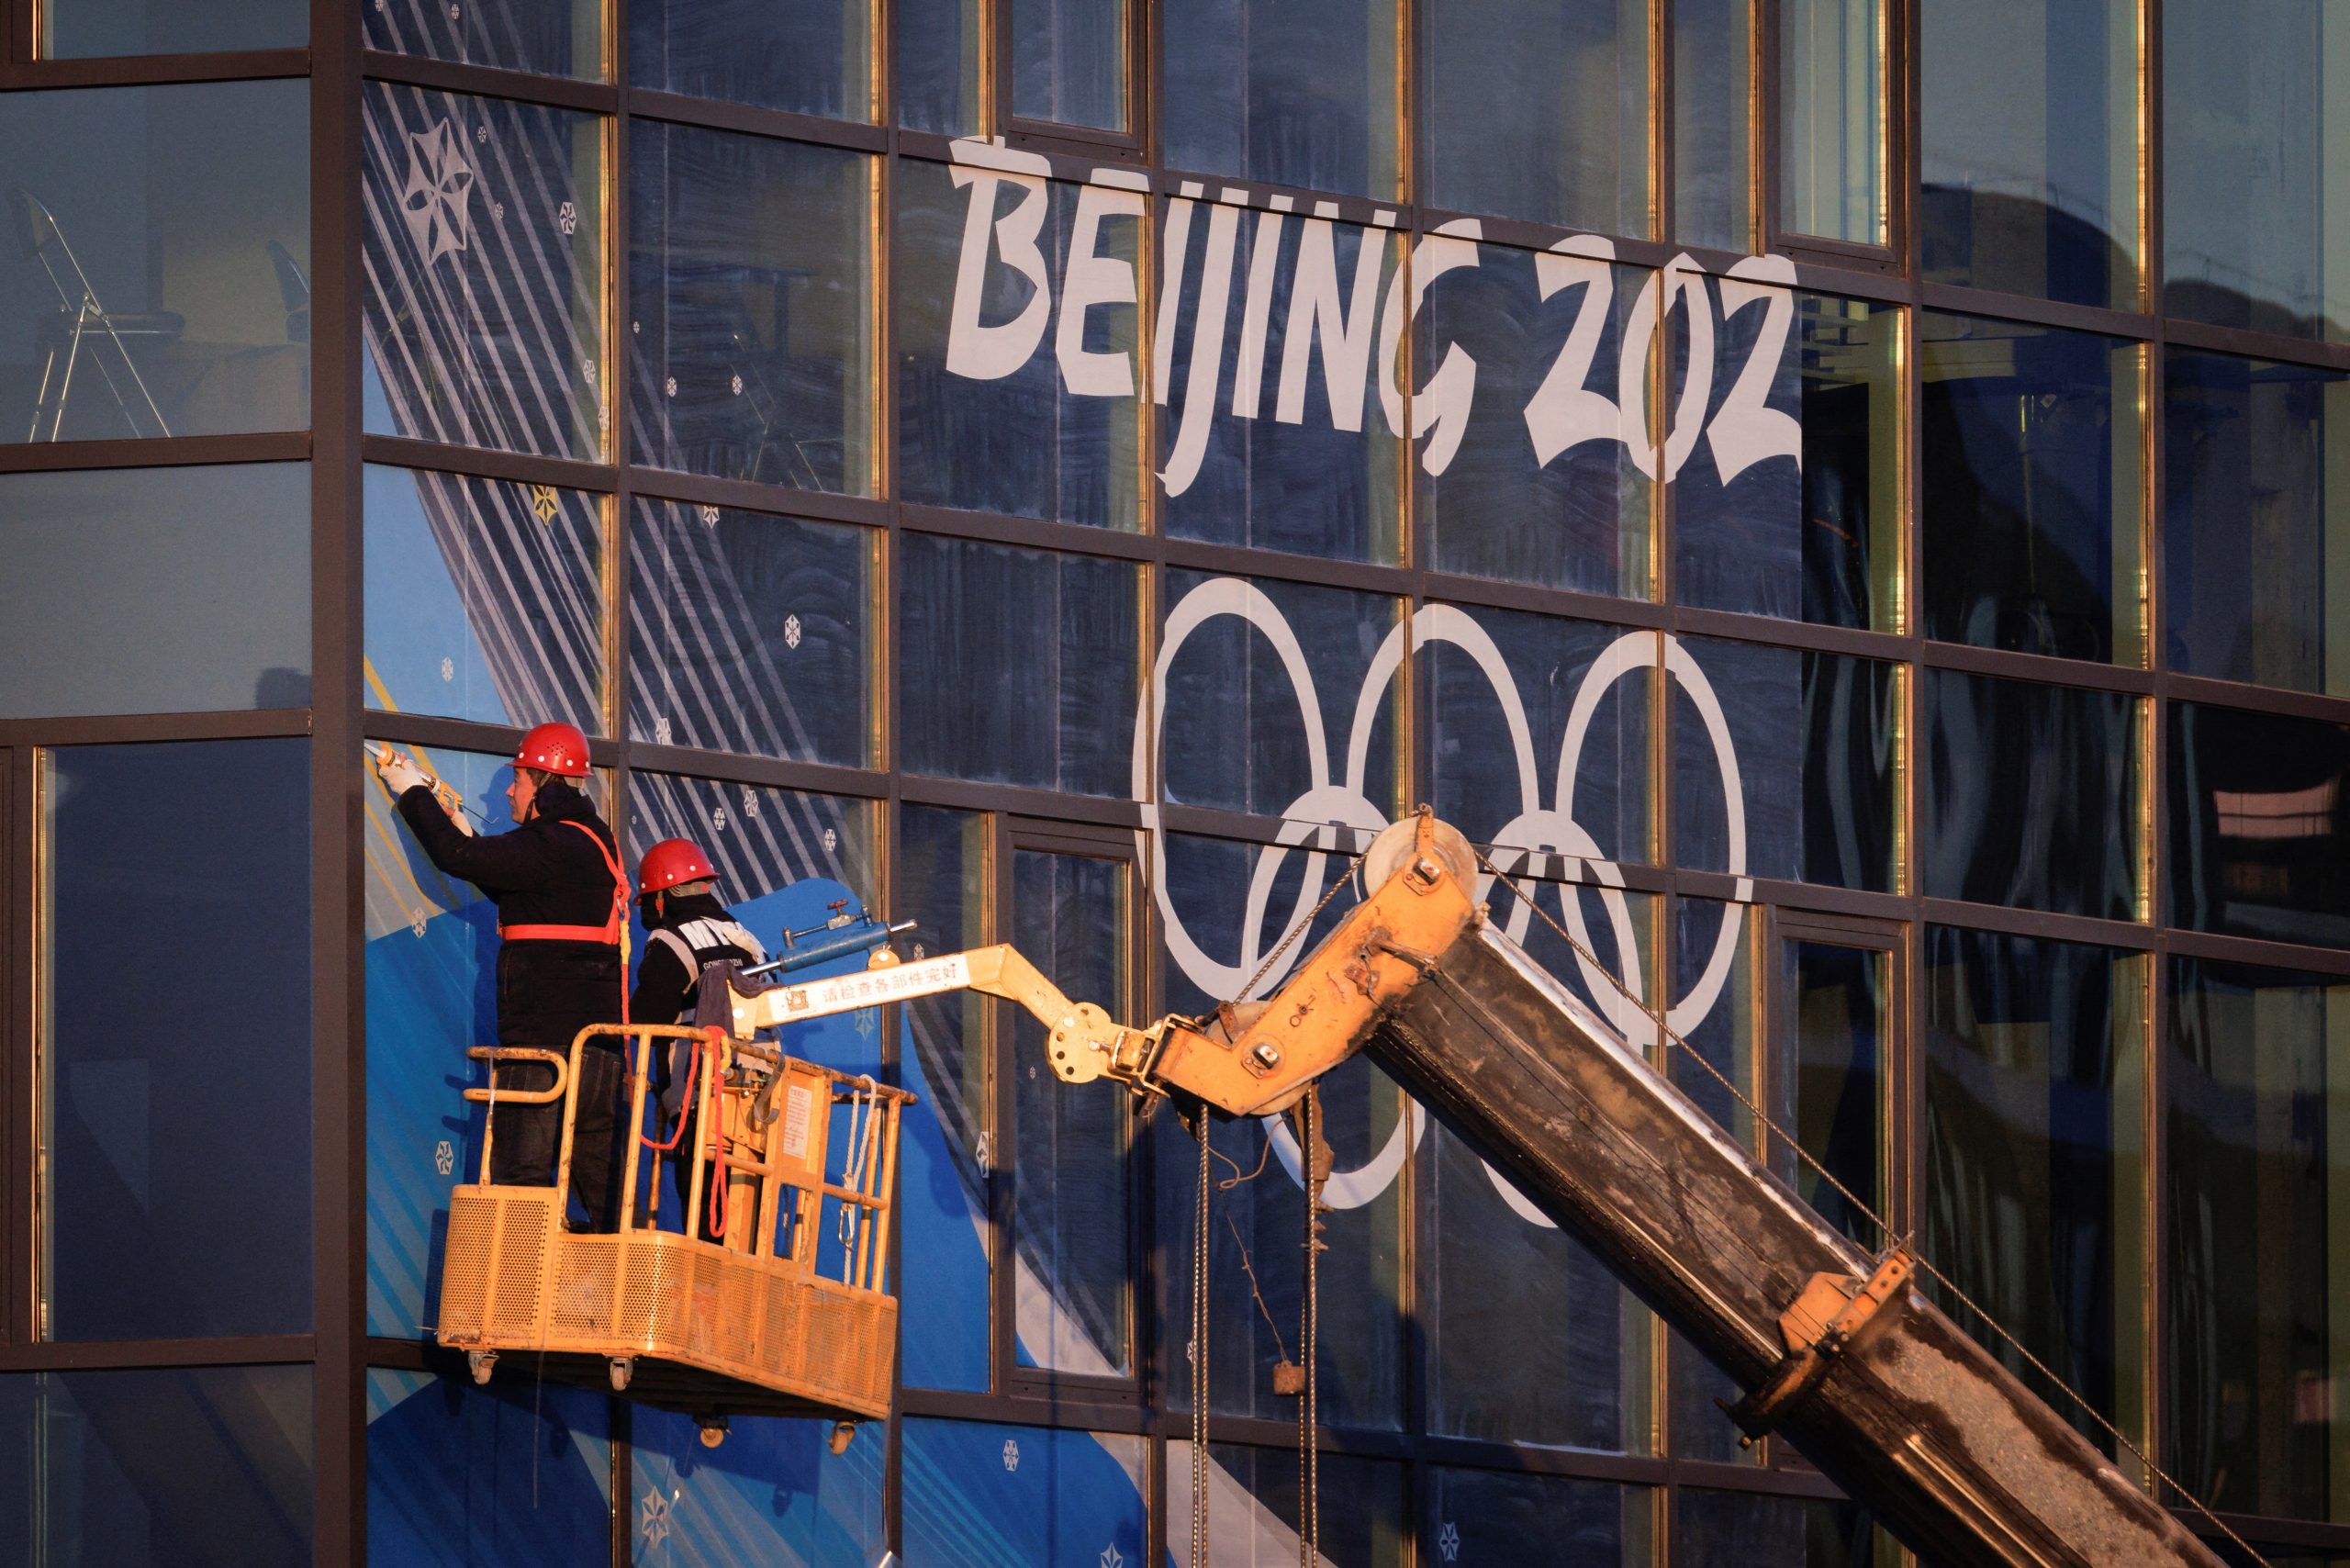 Team Canada CEO “worried” if Beijing Winter Olympics can go ahead as planned